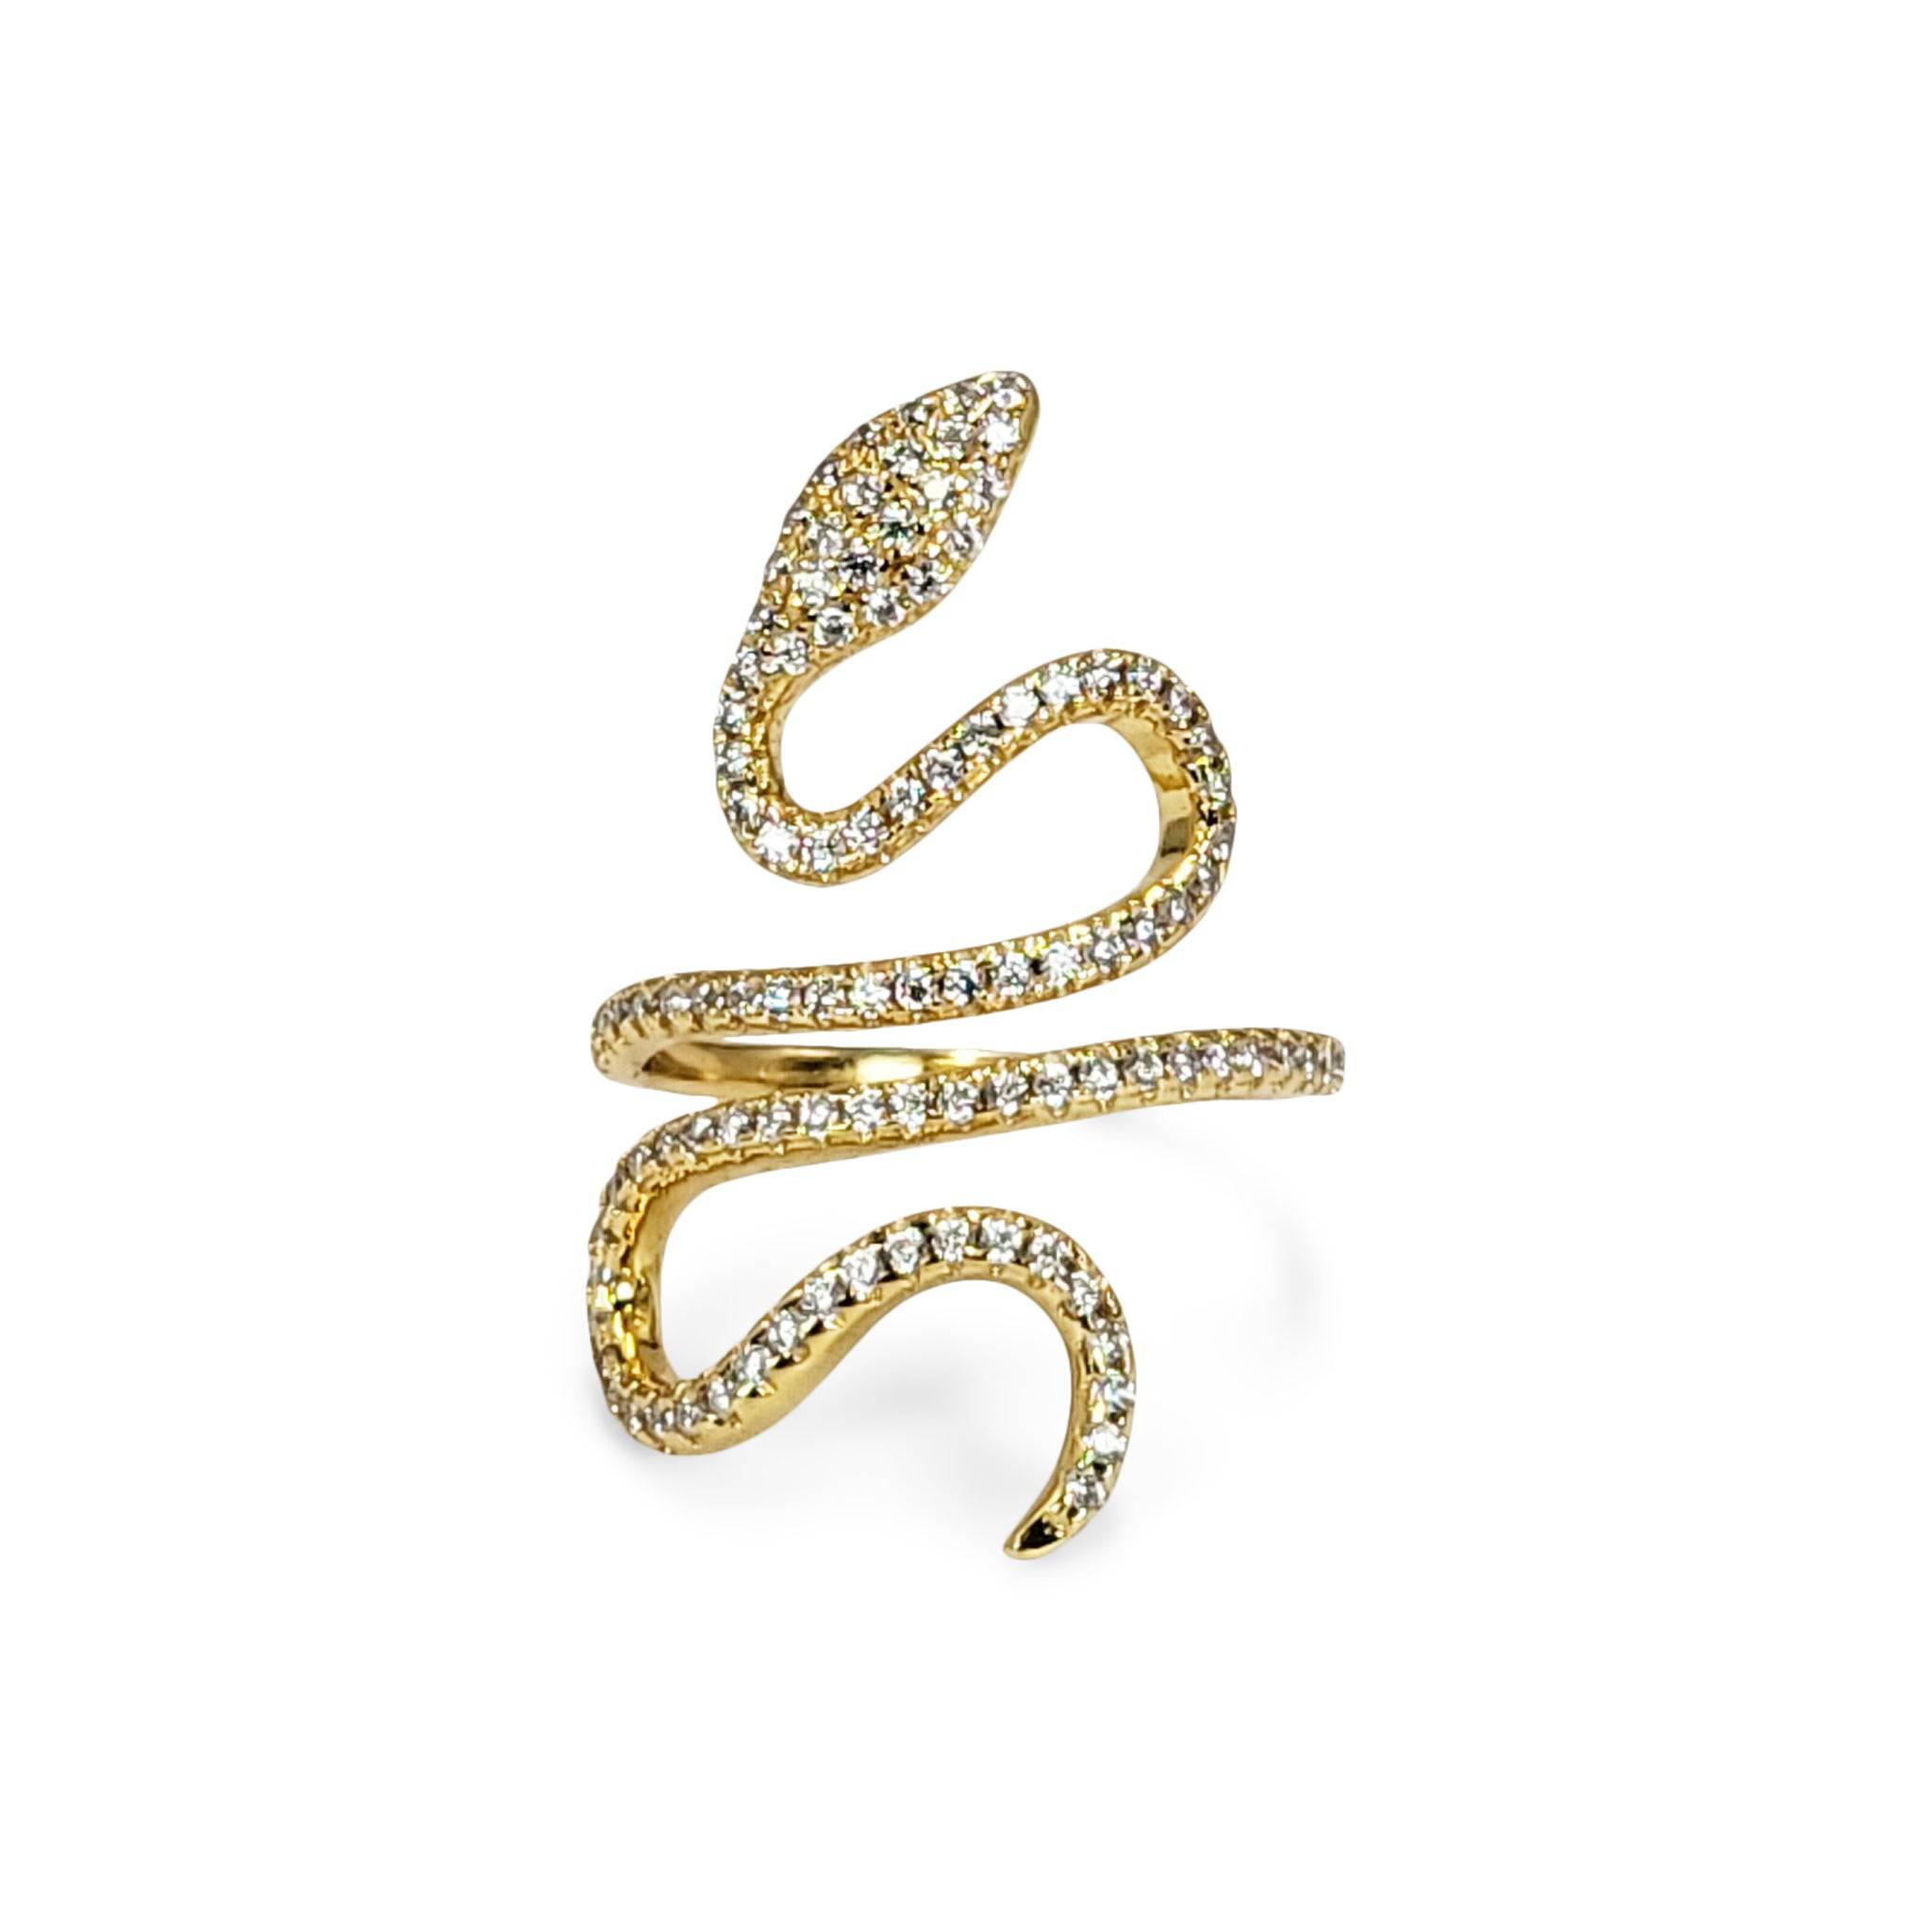 A Diamond and Ruby Snake Ring | Elton Antique Jewellery